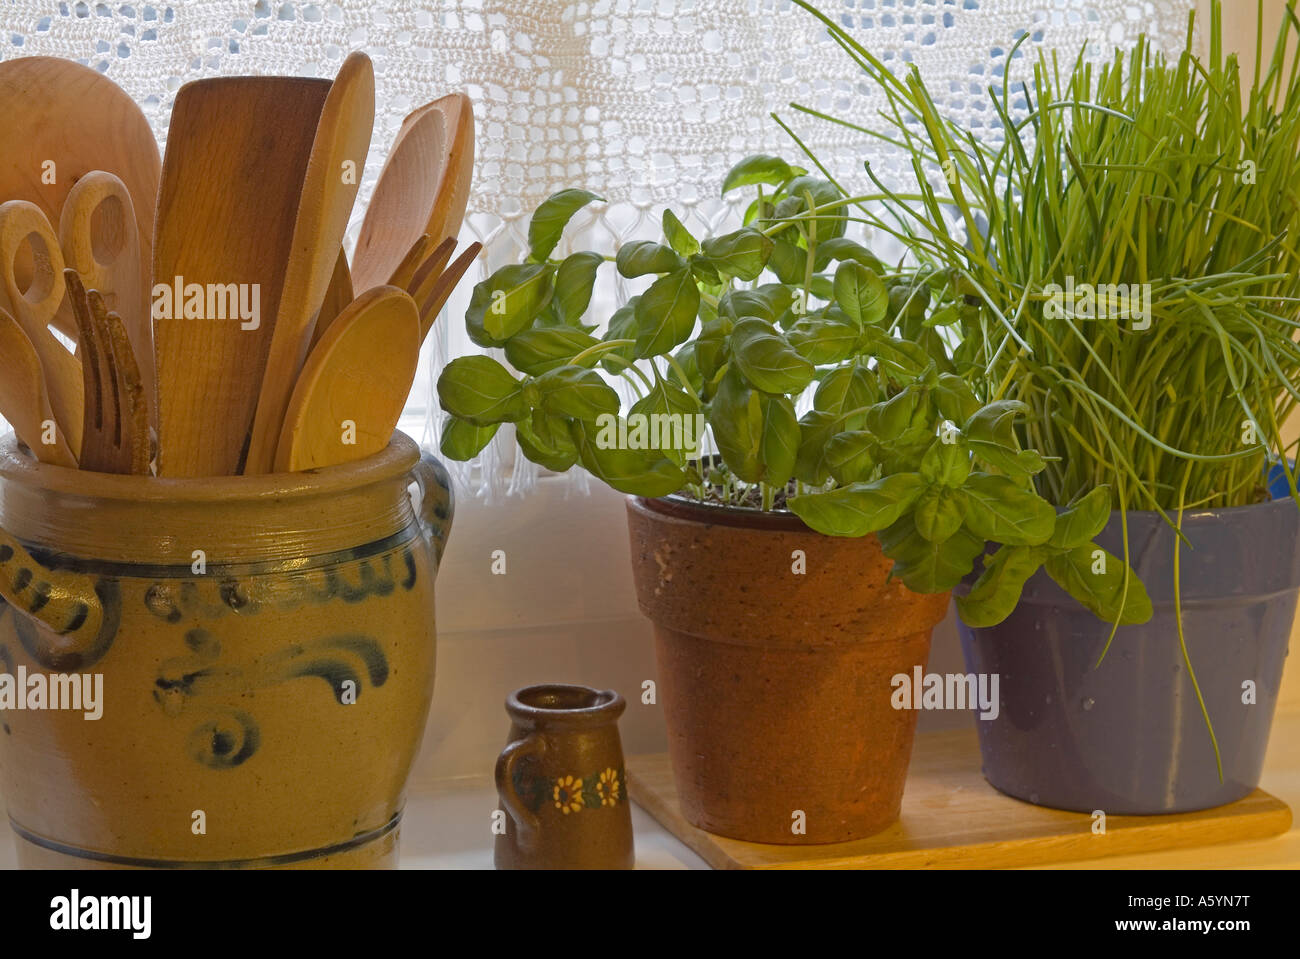 pots with herbs and wooden spoons at kitchen window Stock Photo